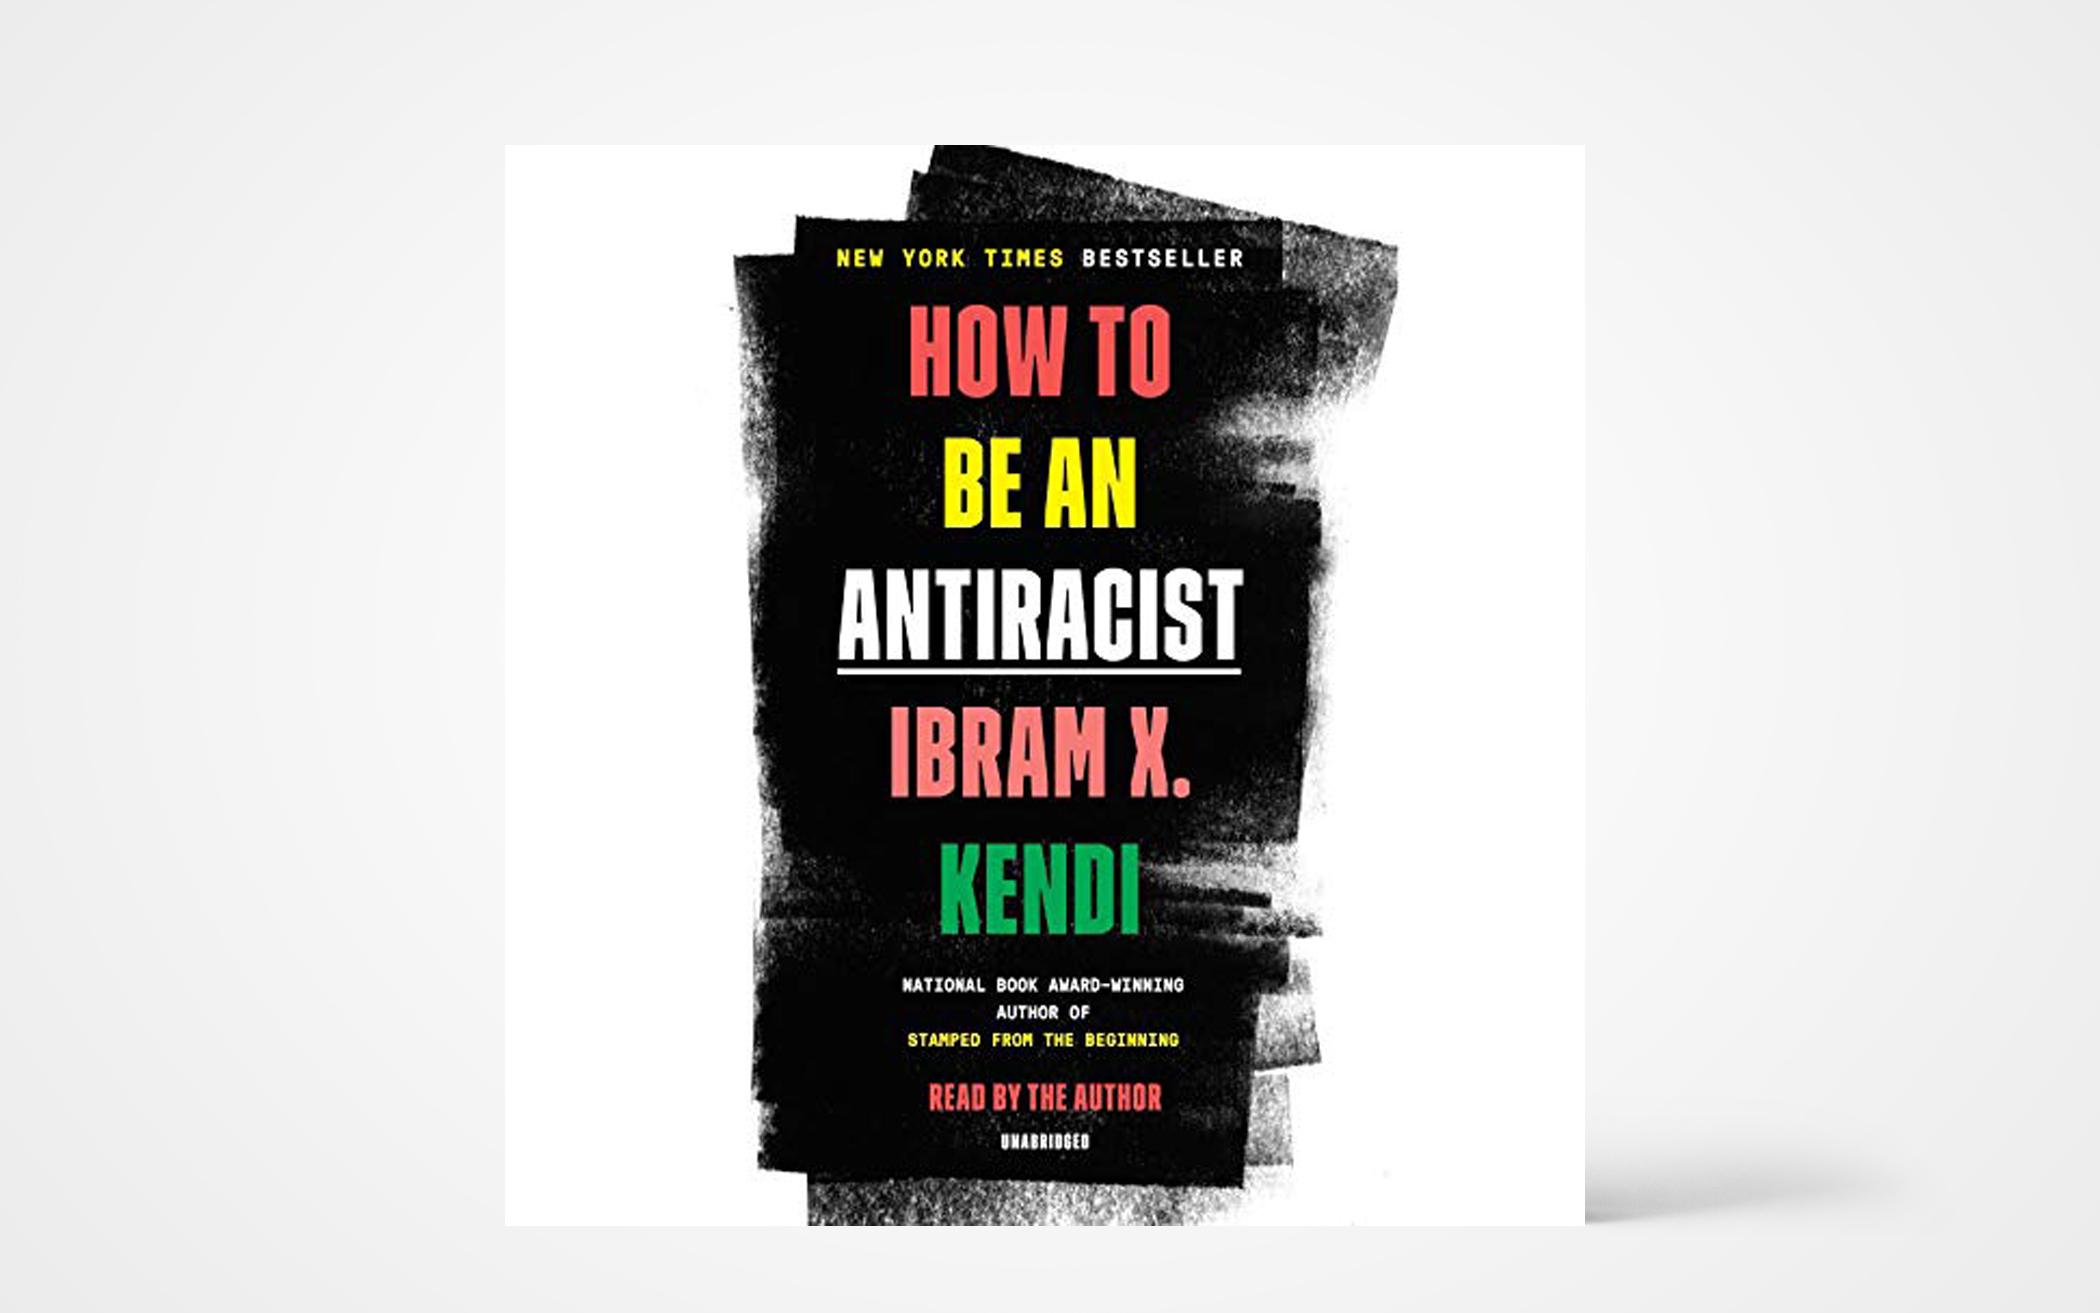 How to Be an Antiracist Audiobook